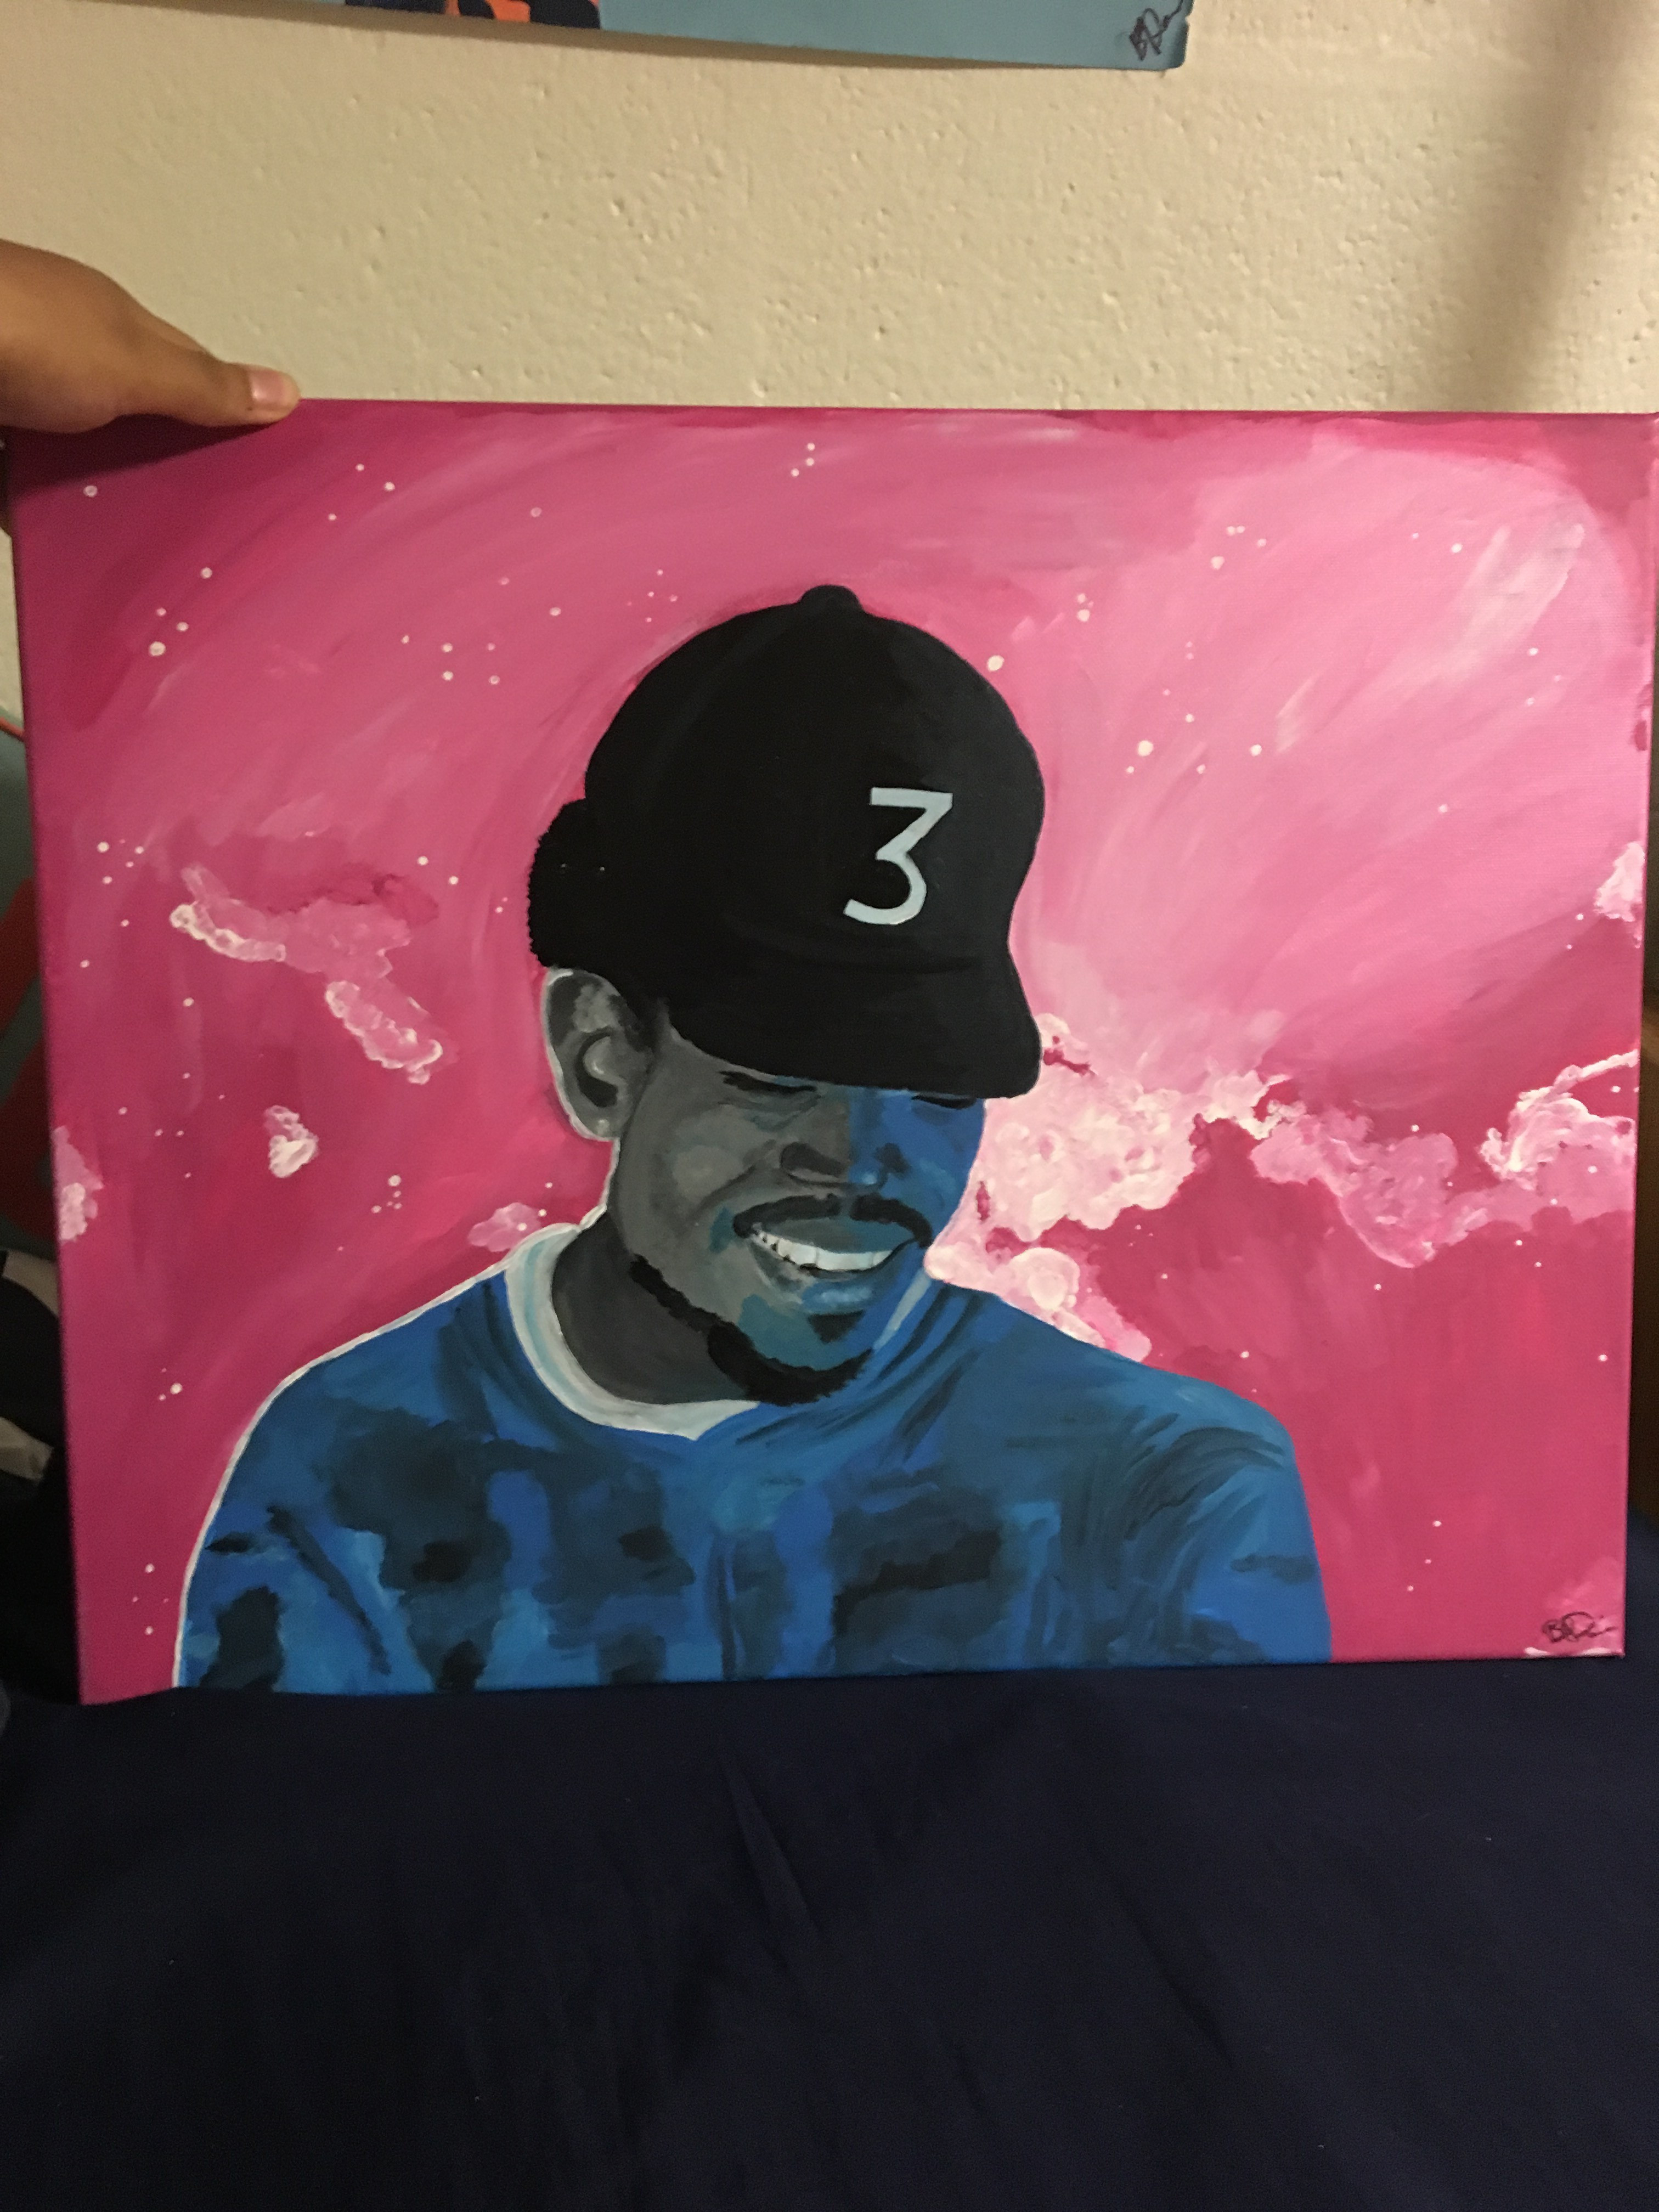 Buy Chance The Rapper Coloring Book
 Chance the Rapper Coloring Book mixtape cover